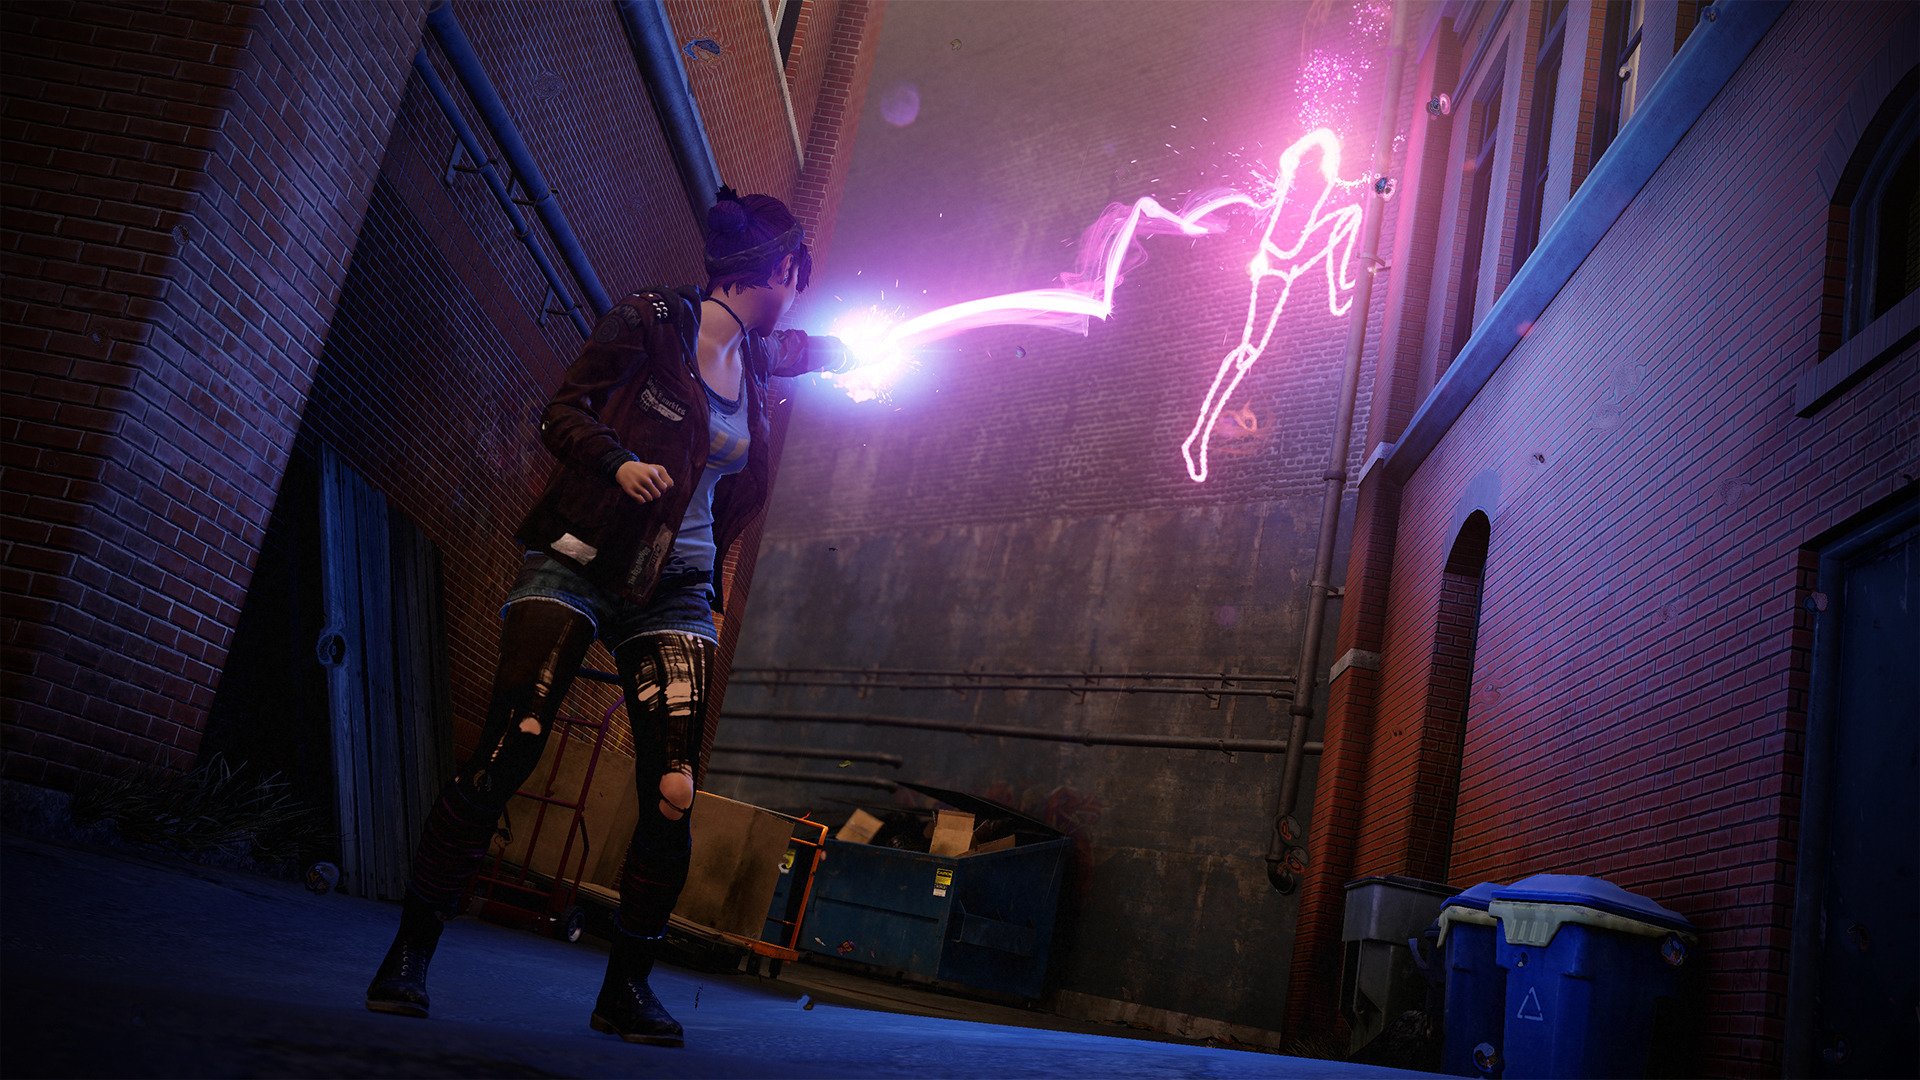    inFamous: First Light